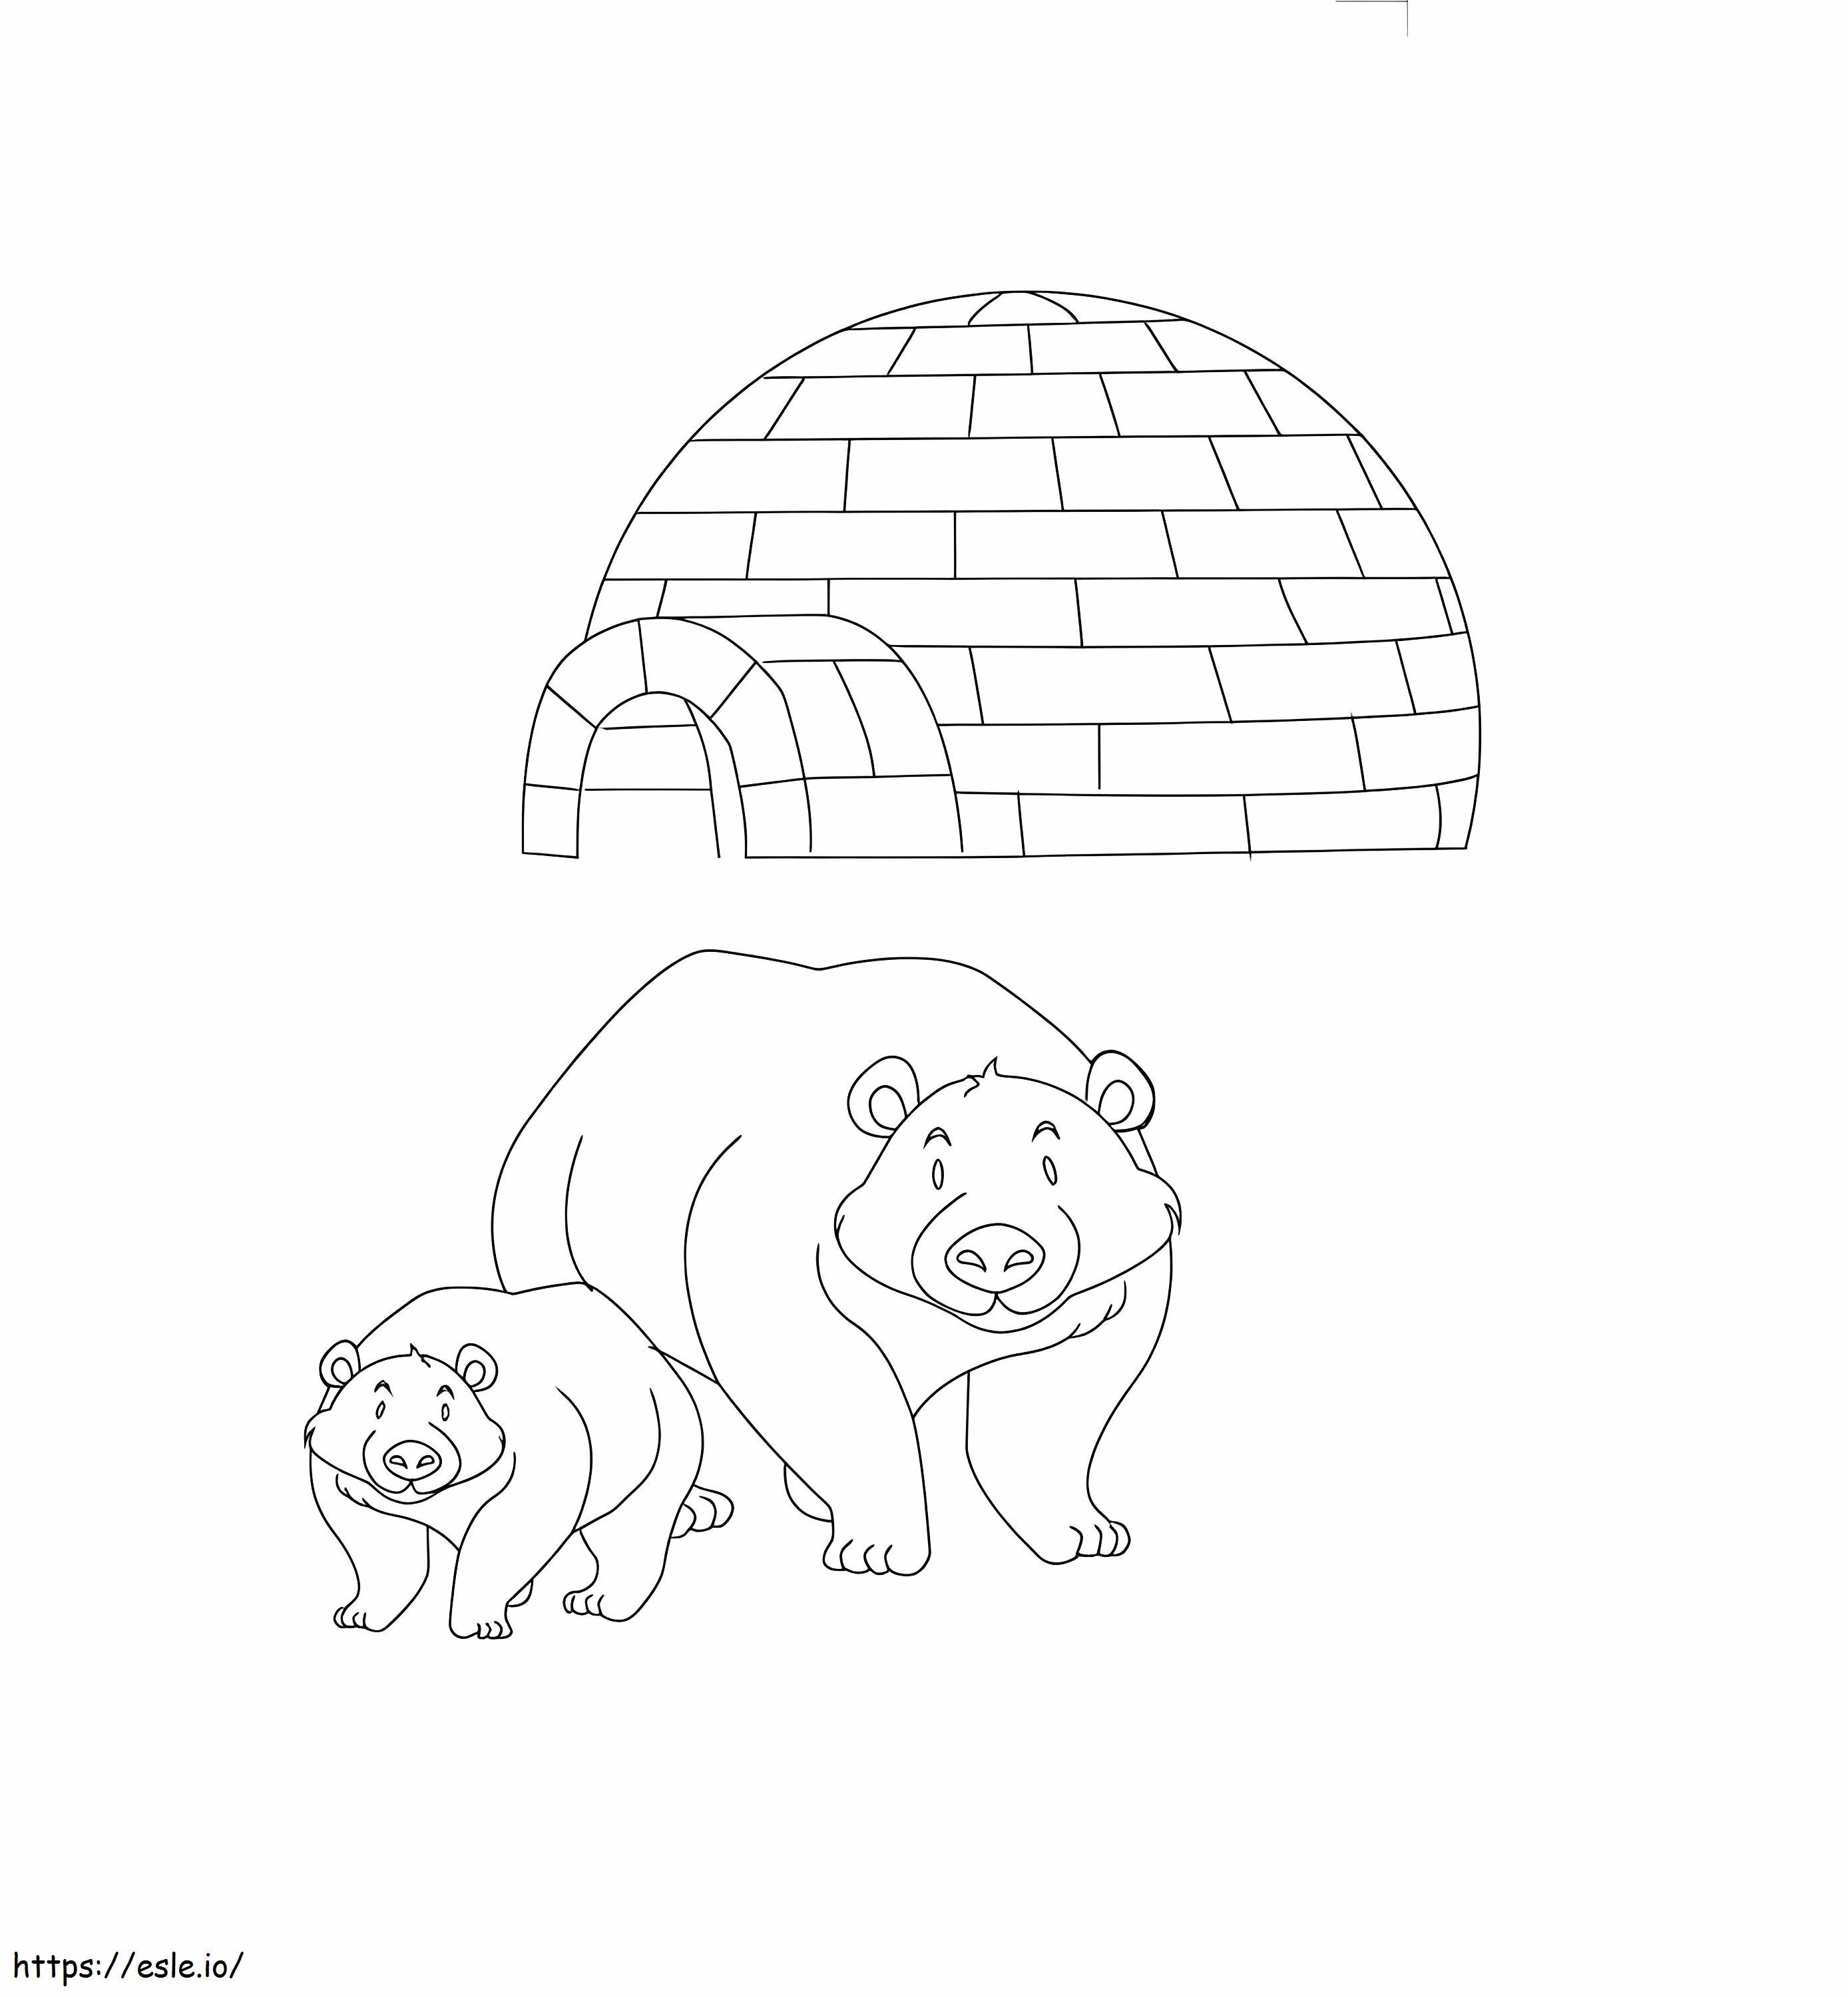 Two Bear And Iglu coloring page